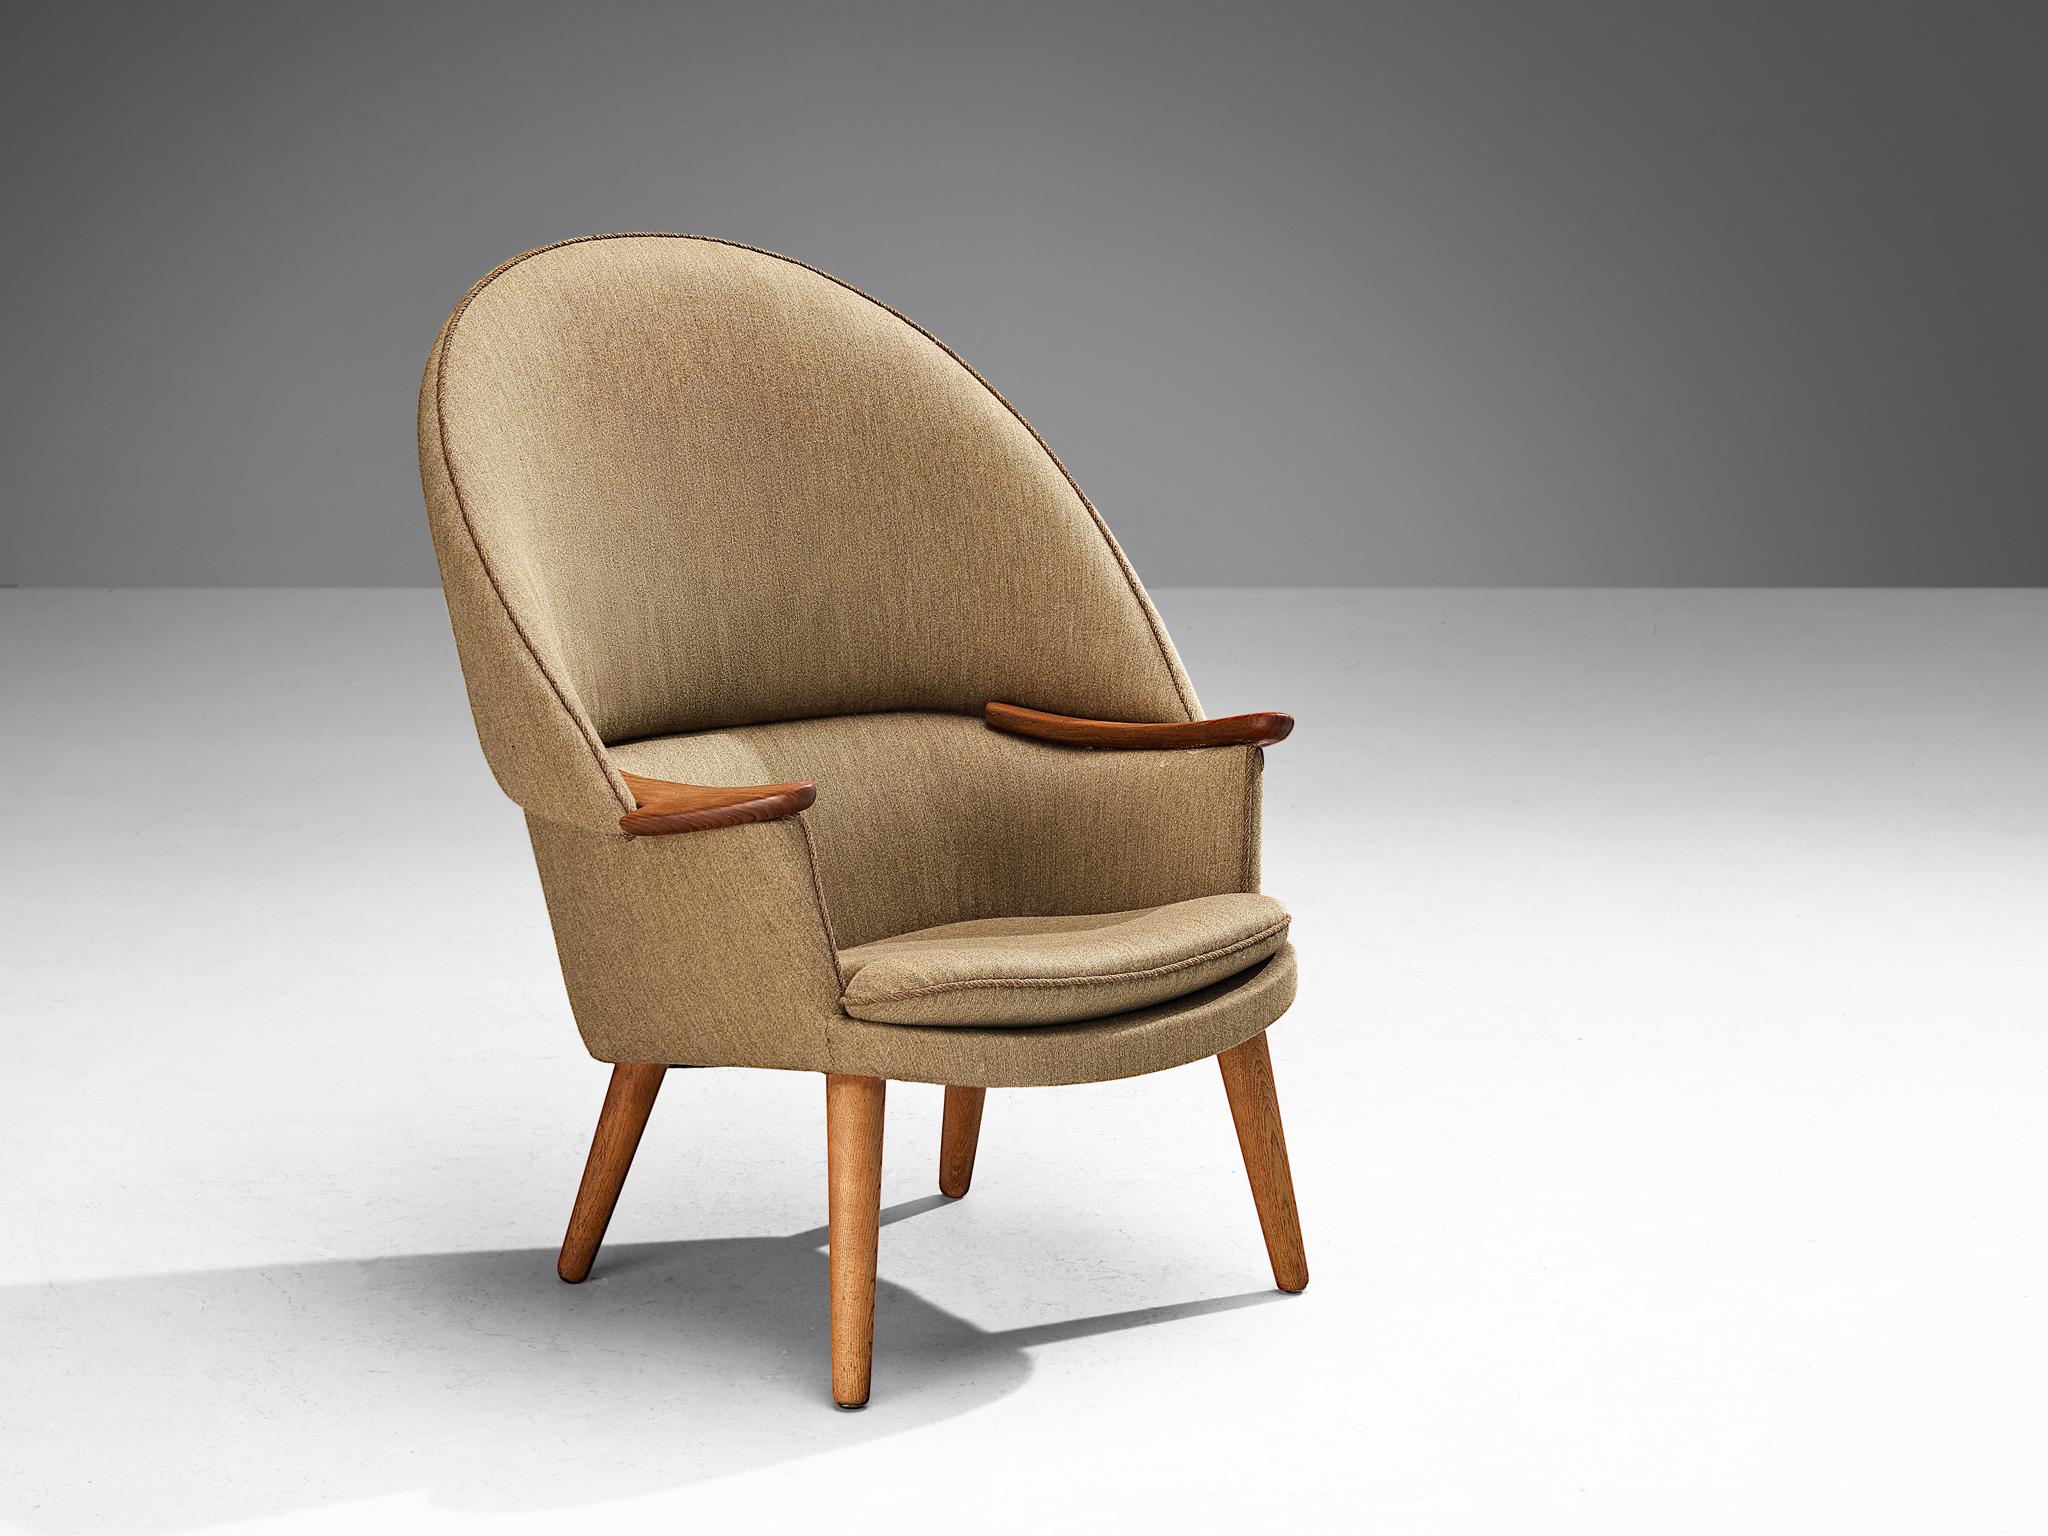 Erik Ole Jørgensen for Chris Sørensen, easy chair, wool, teak, oak, Denmark, design 1954 

This extremely rare armchair is designed by Erik Ole Jørgensen and crafted by Chris Sørensen. What defines this piece is the way the corpus is expertly